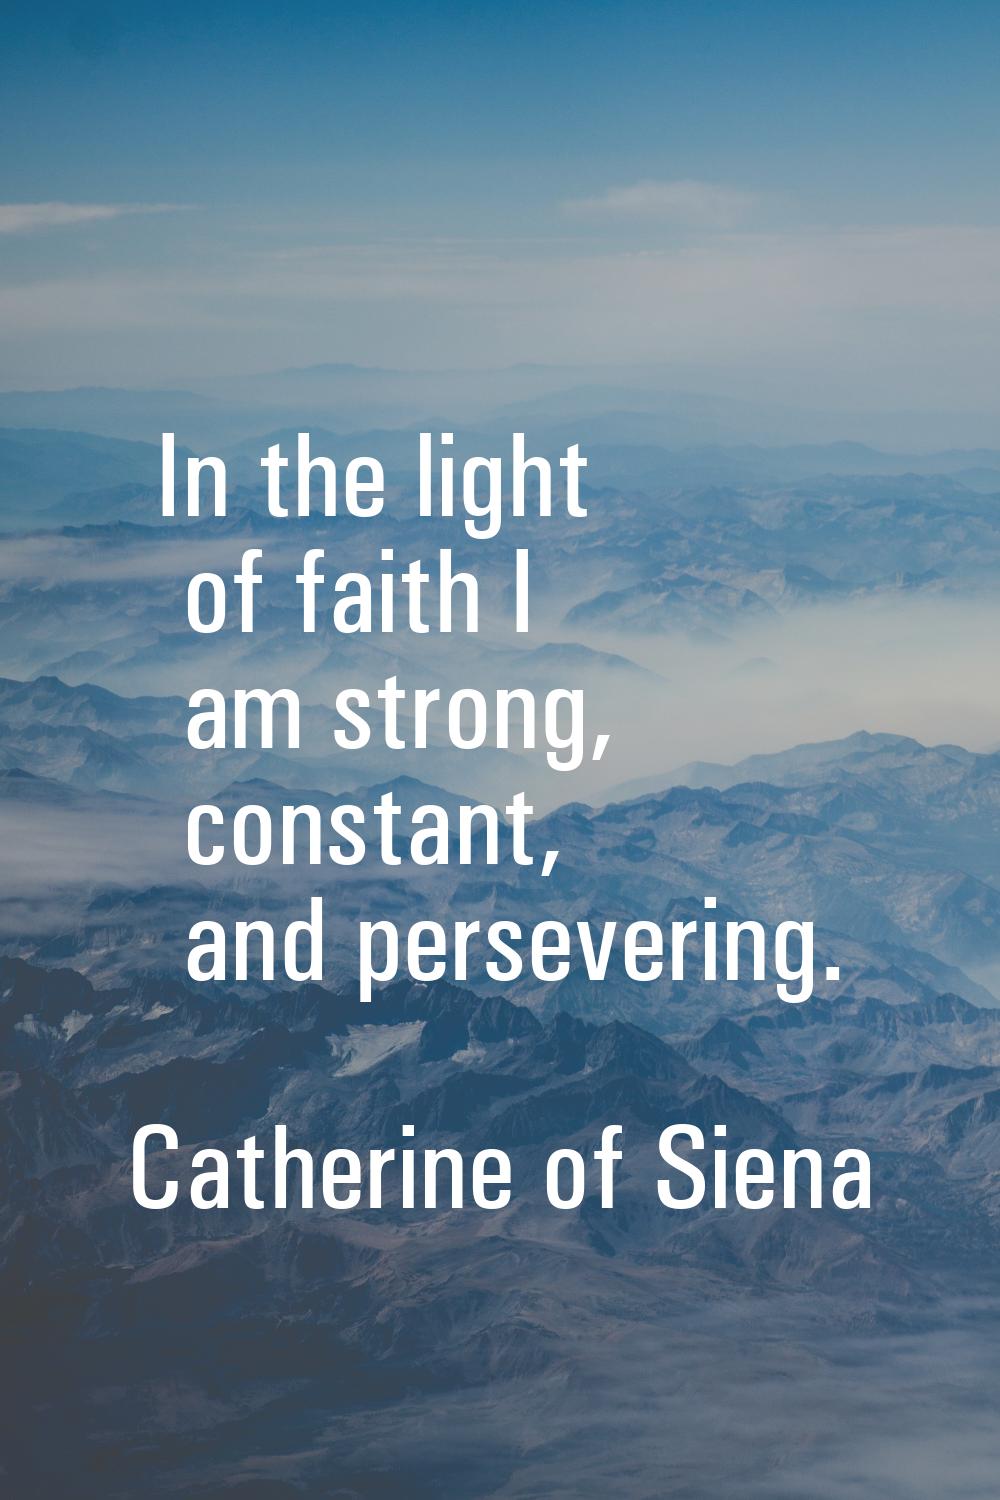 In the light of faith I am strong, constant, and persevering.